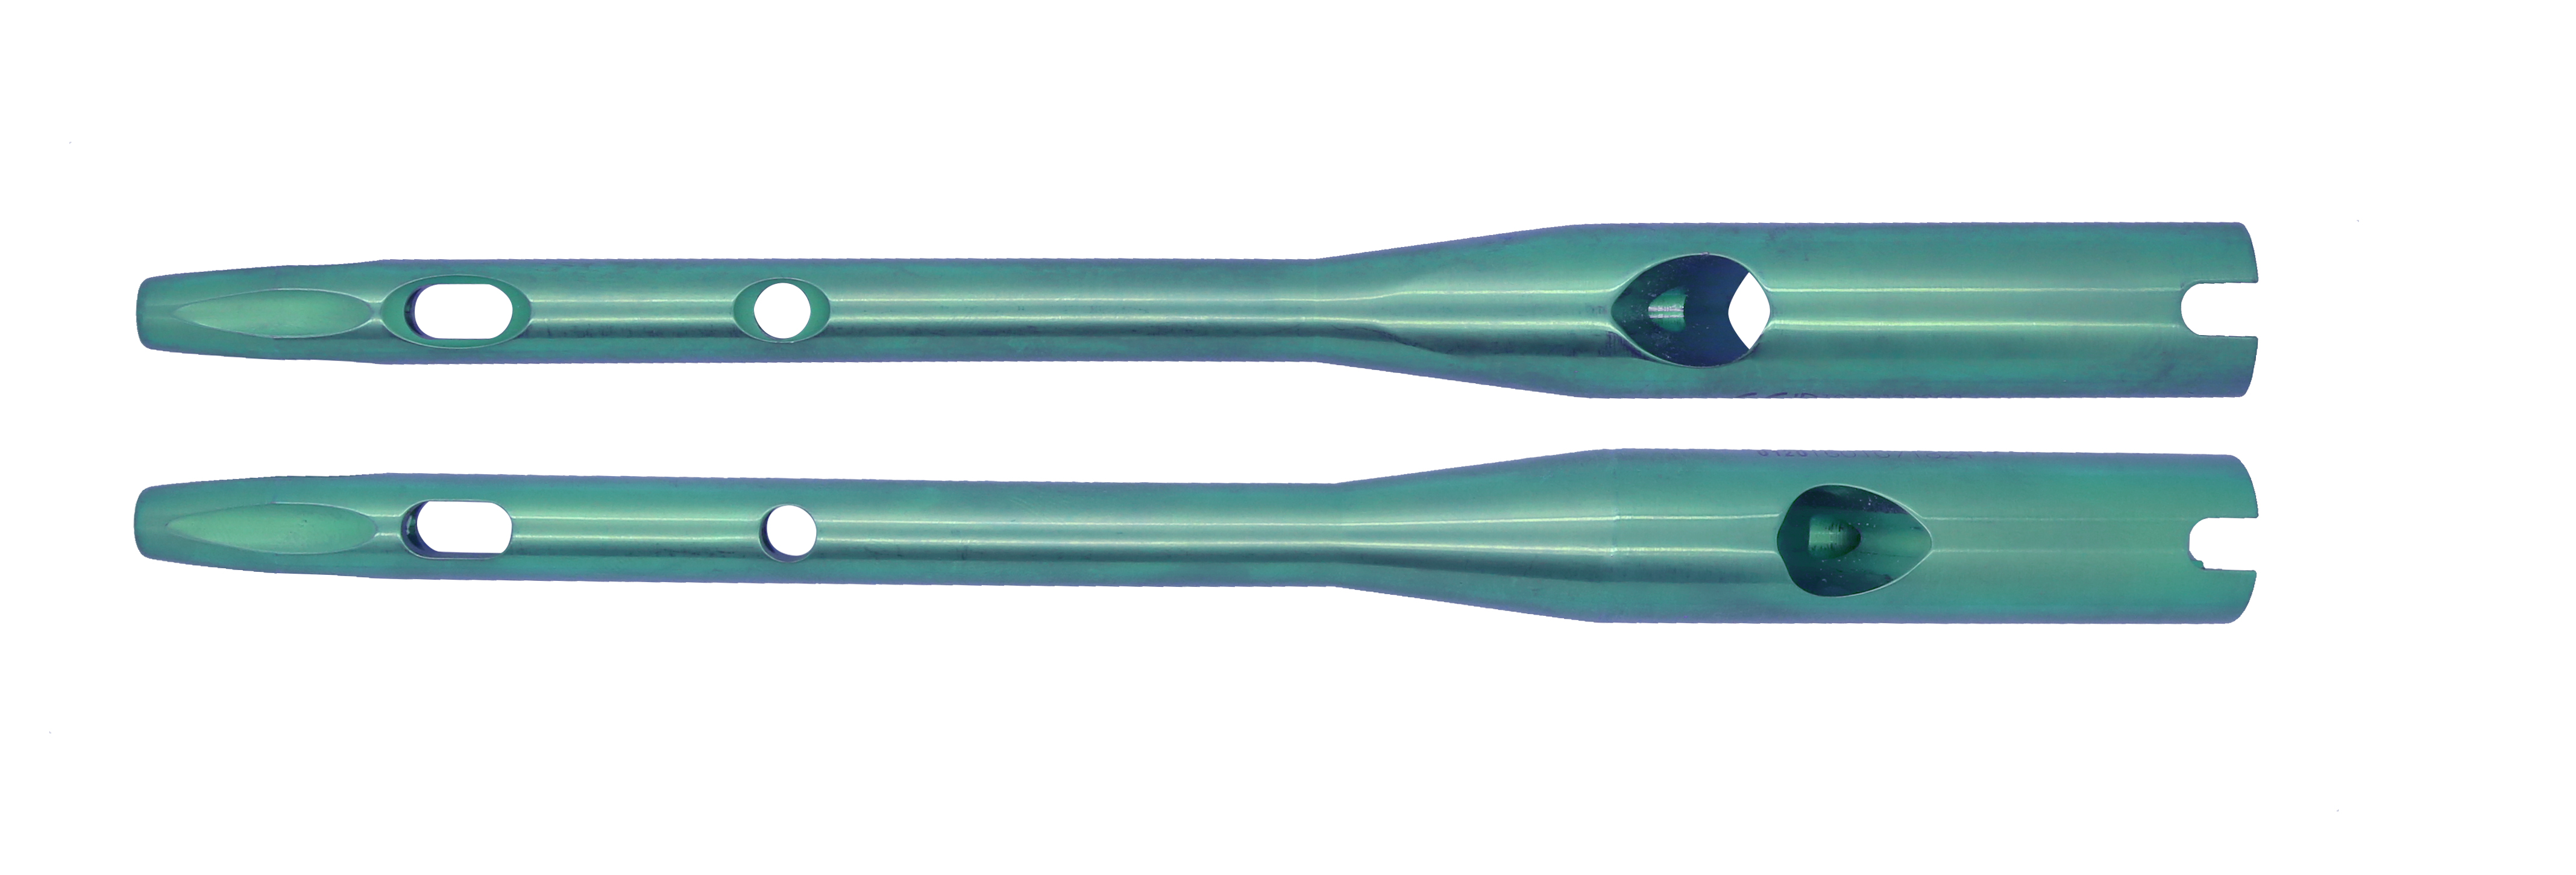 PFNA Proximal Femoral Nail Antirotation, Spiral Blade with Distal Aiming Arm, Cannulated